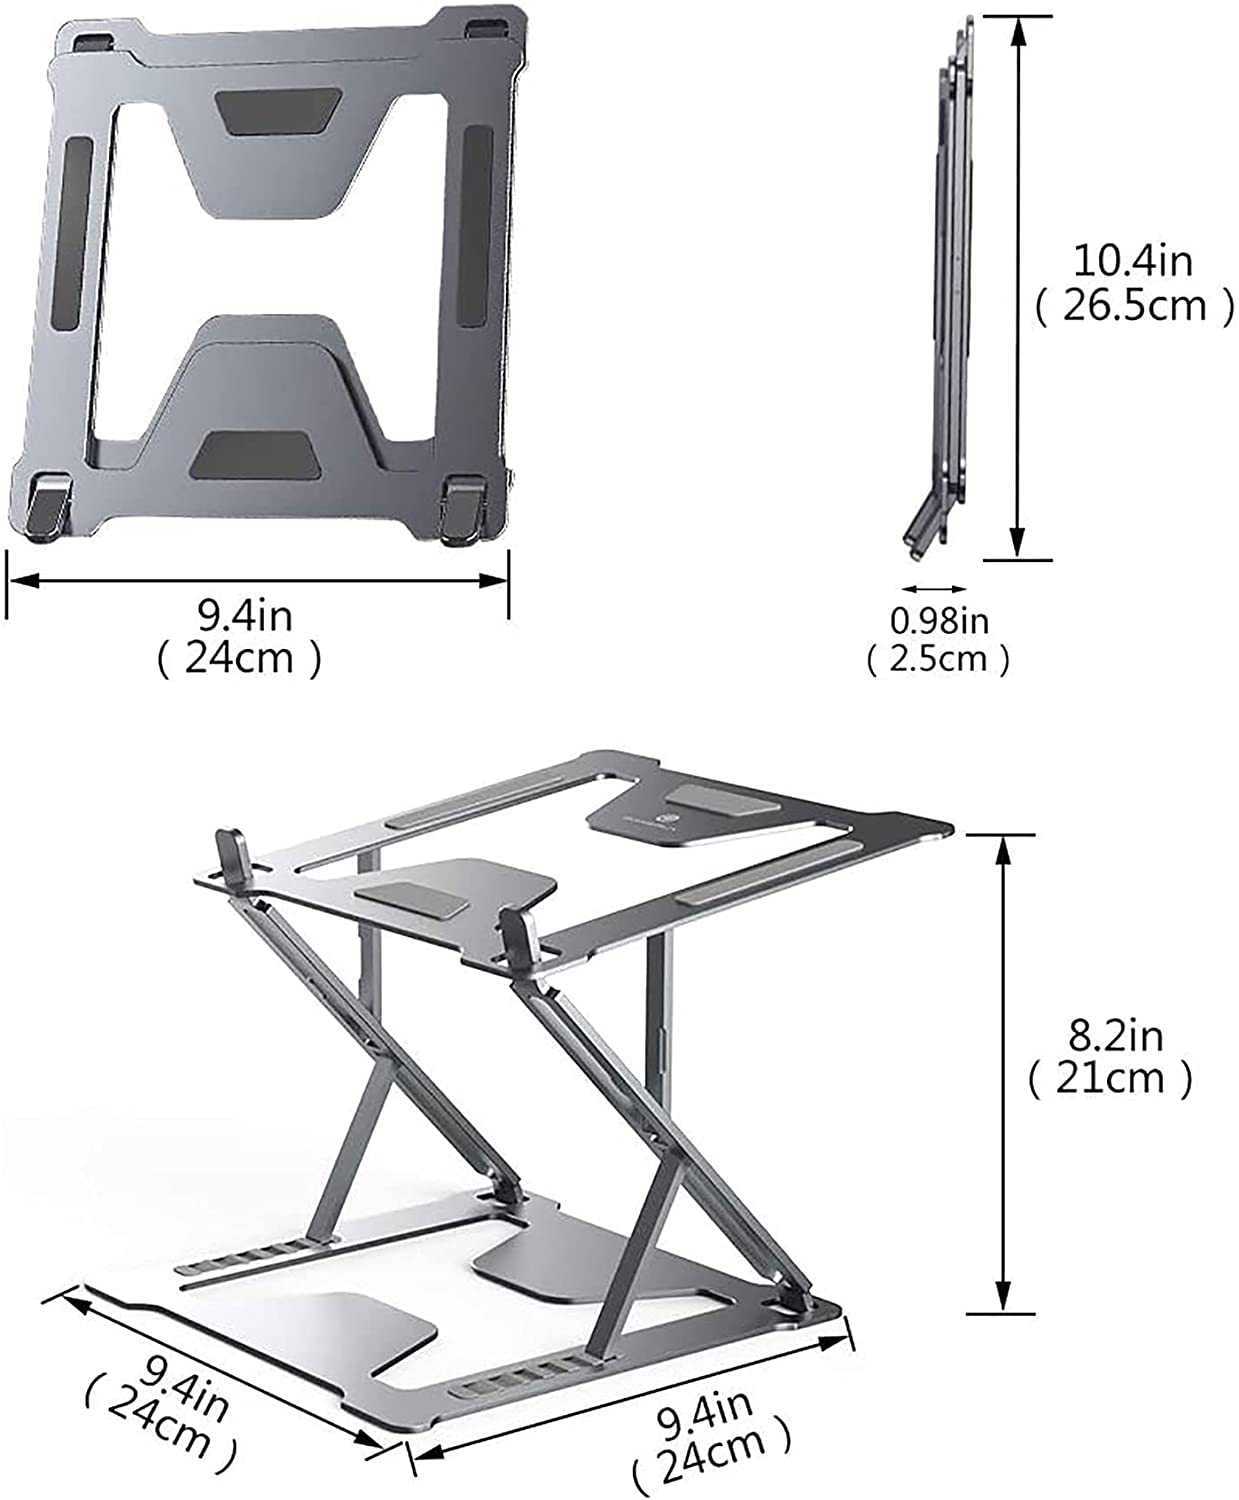 Laptop Stand, Foldable Portable Laptop Stand for Desk, Folding Laptop Stand Adjustable Height, Ergonomic Compatible with 11-17.3 ‘’Laptops